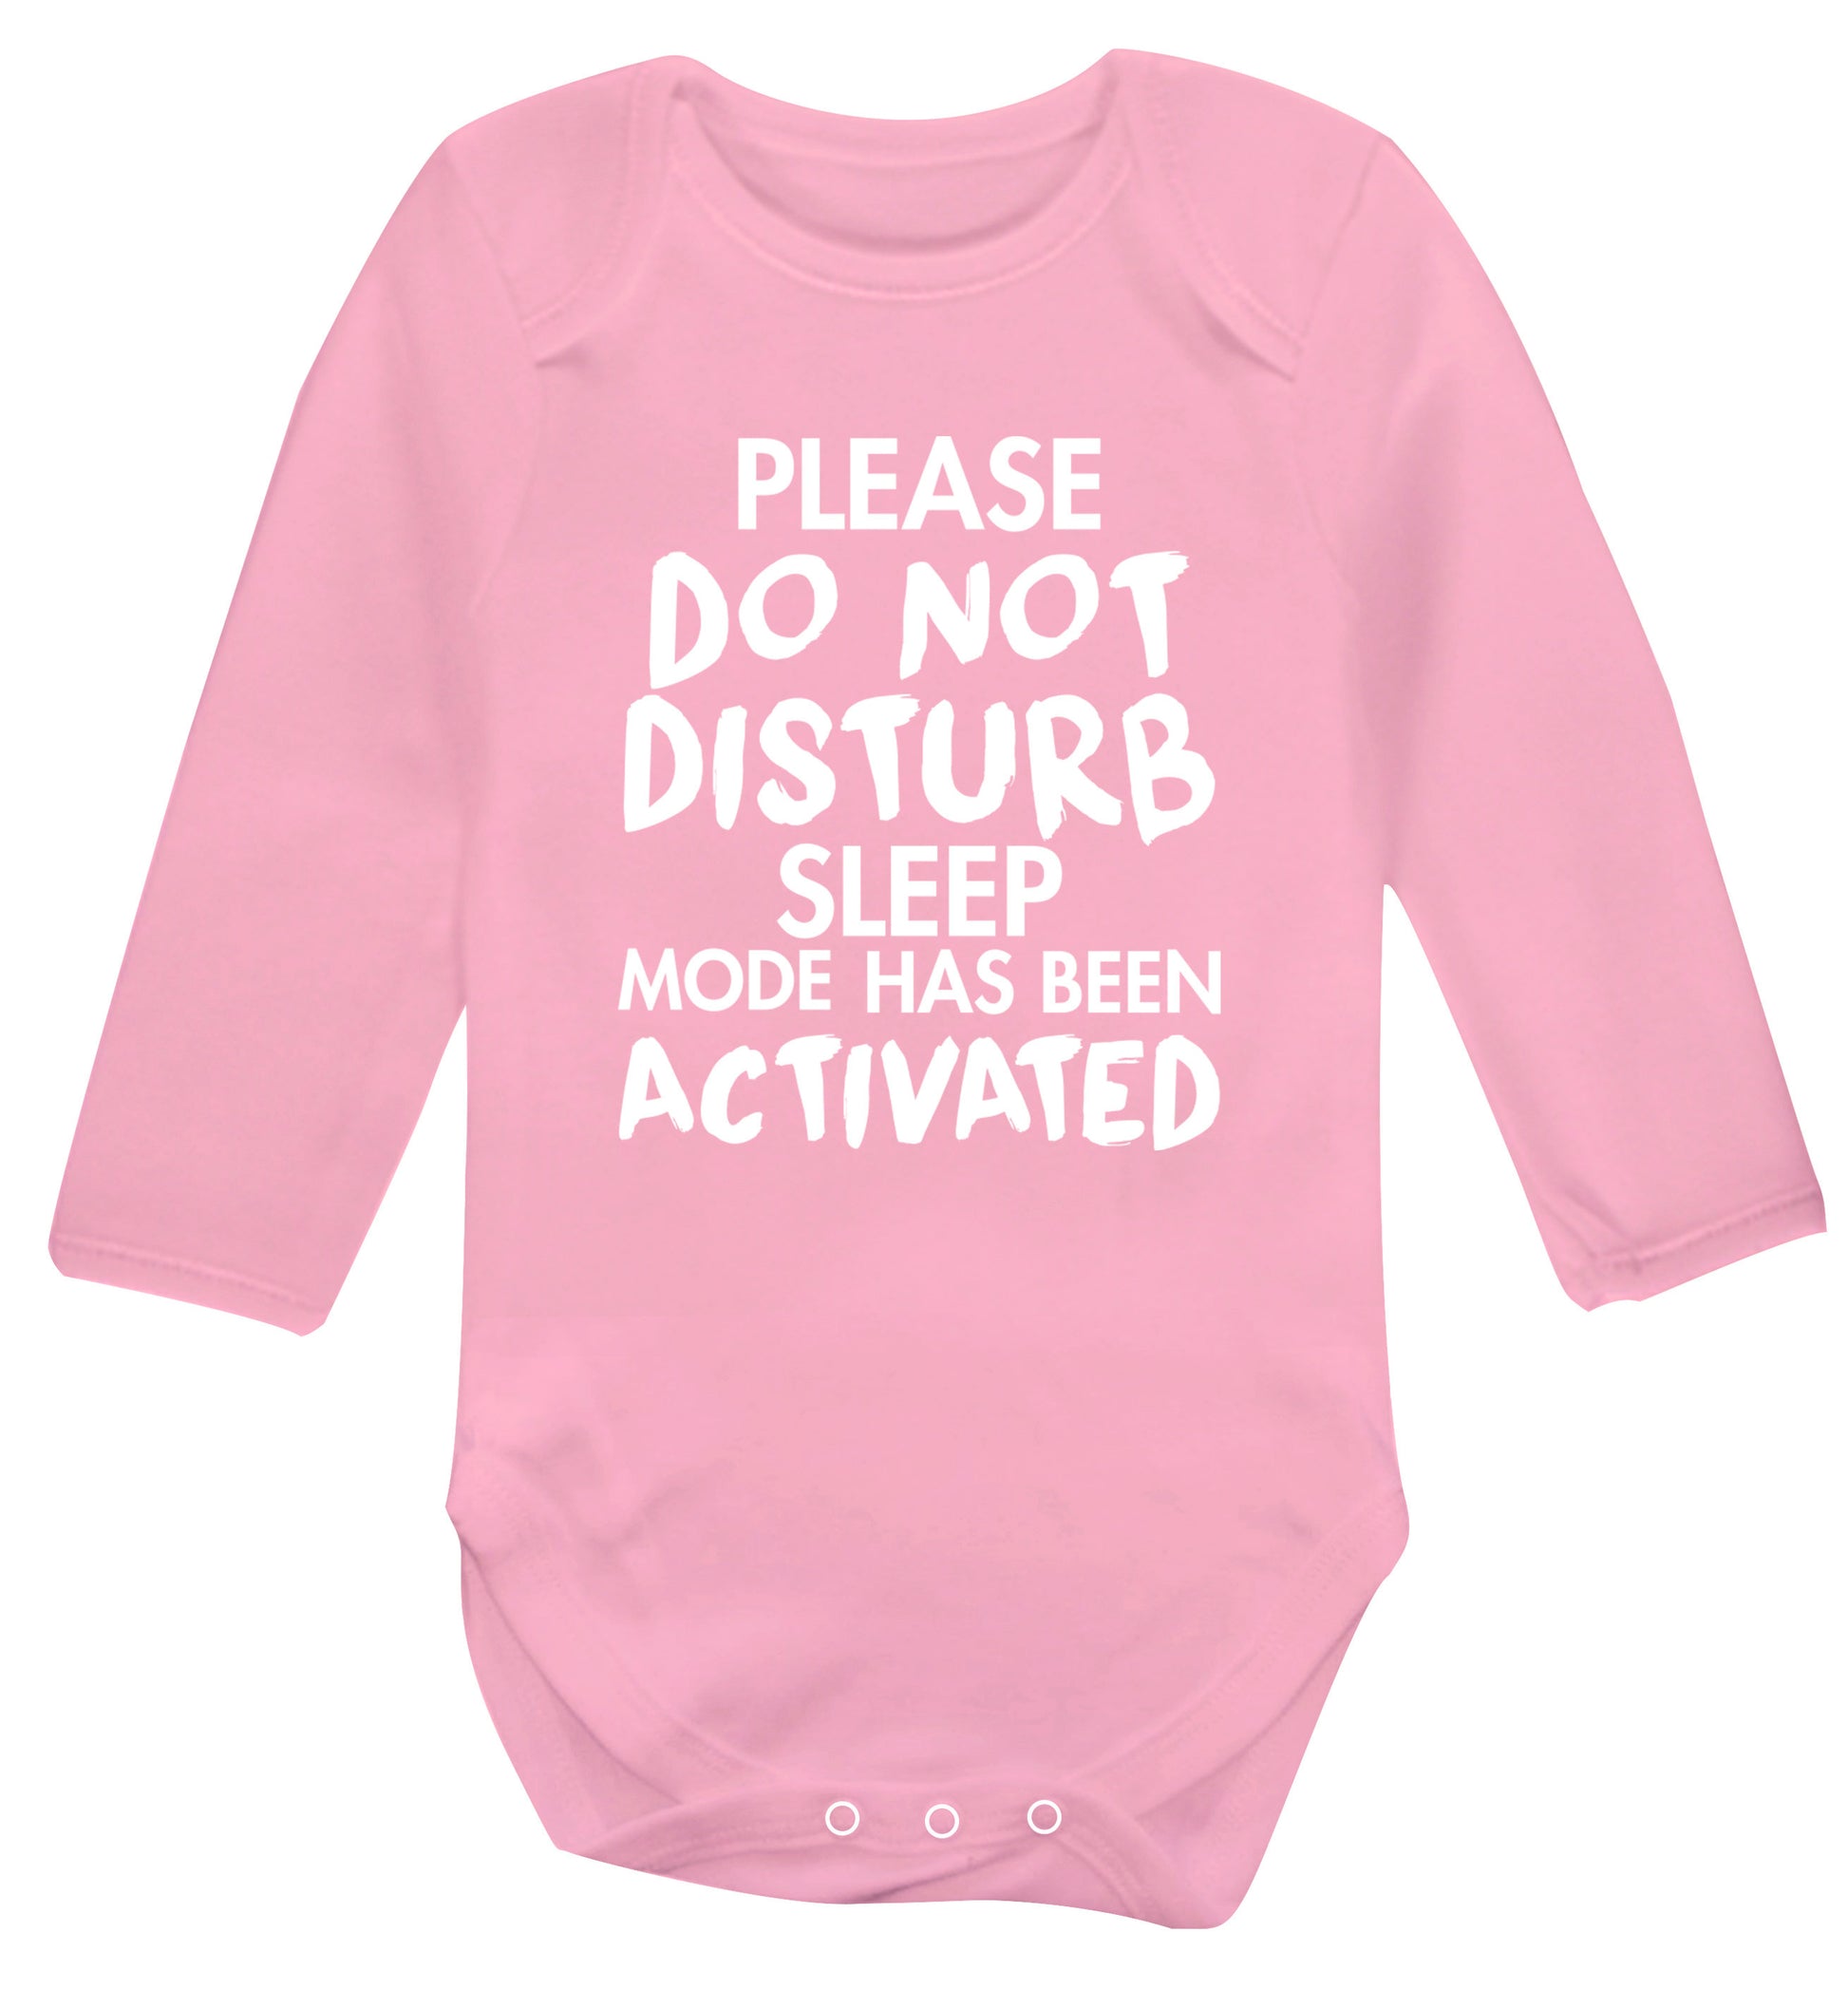 Please do not disturb sleeping mode has been activated Baby Vest long sleeved pale pink 6-12 months